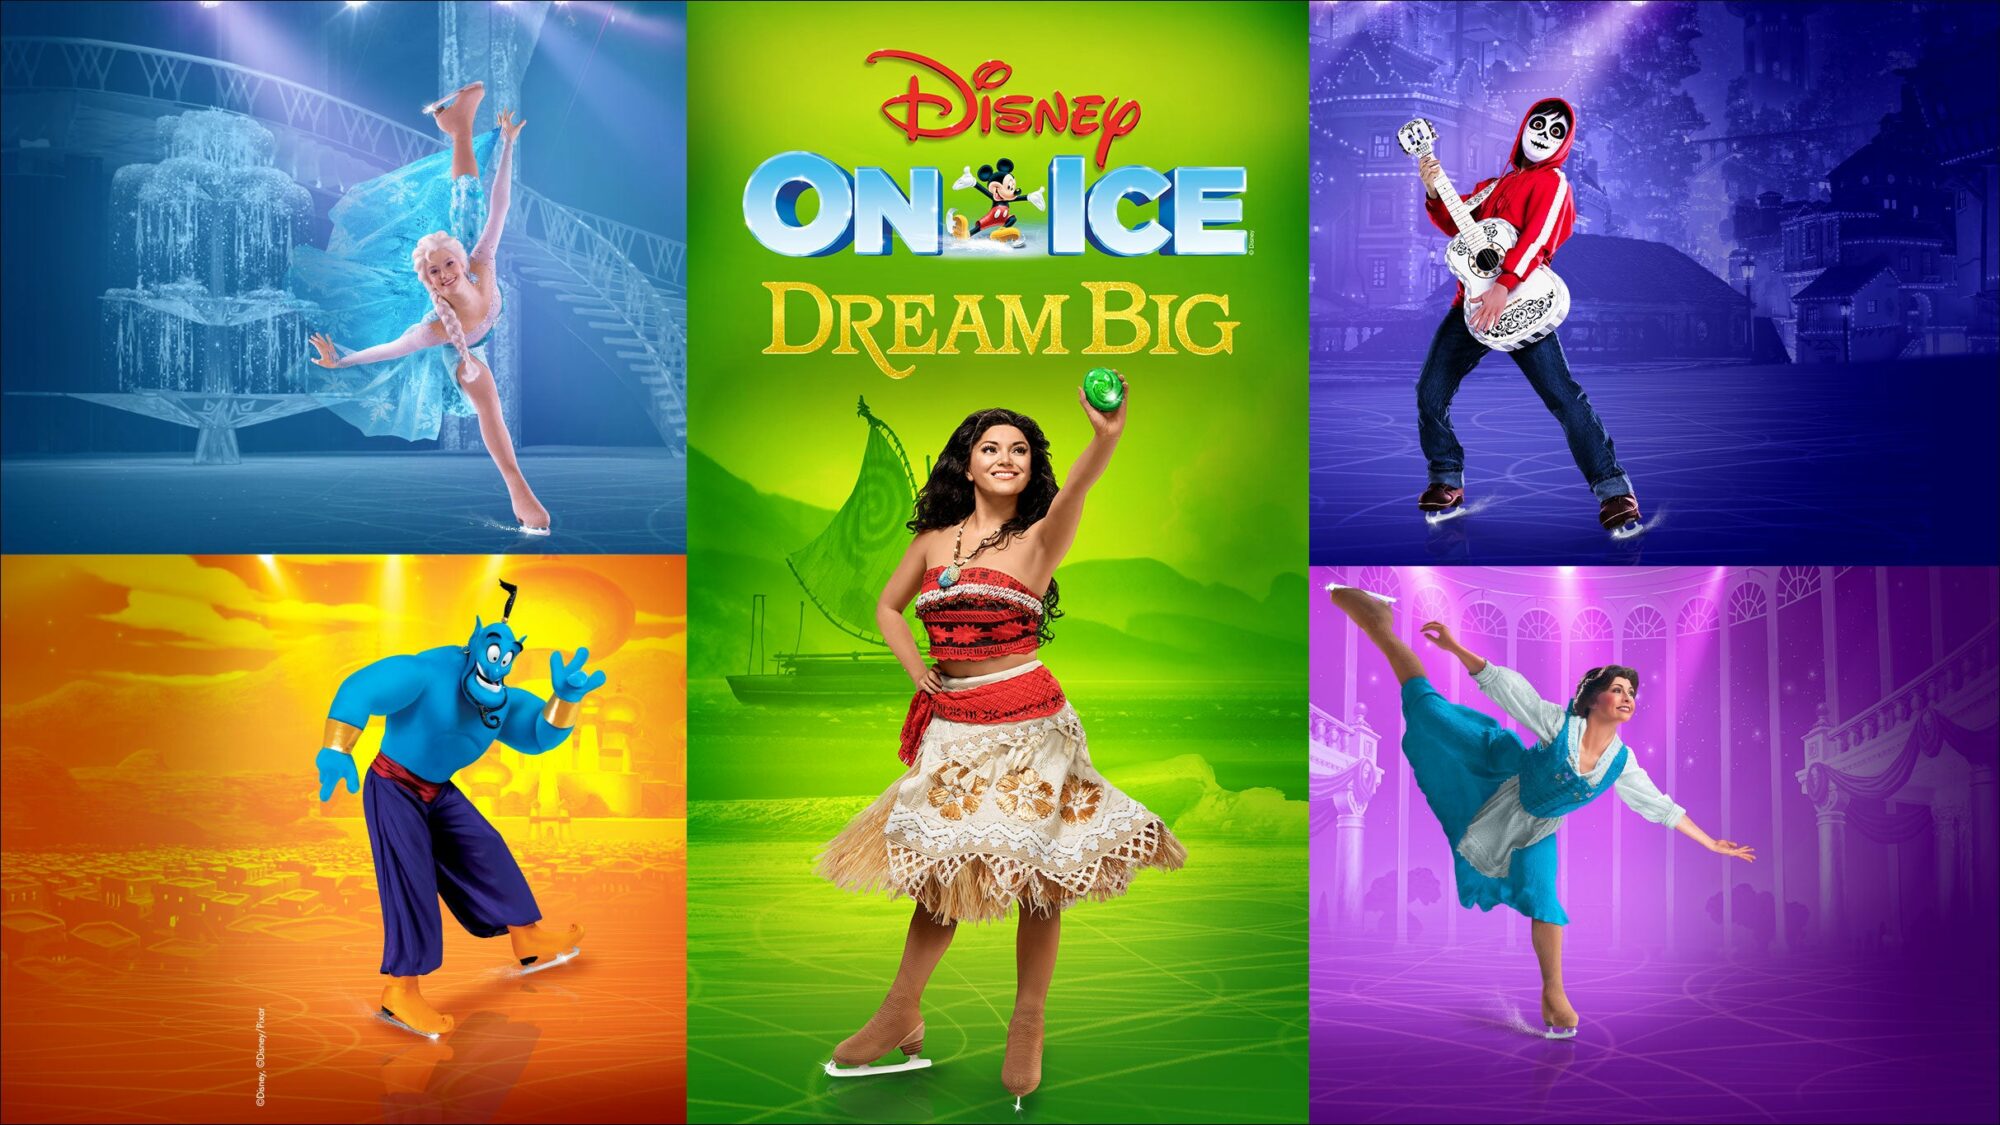 Image name Disney On Ice presents Dream Big at First Direct Arena Leeds the 4 image from the post Disney On Ice presents Dream Big at First Direct Arena, Leeds in Yorkshire.com.